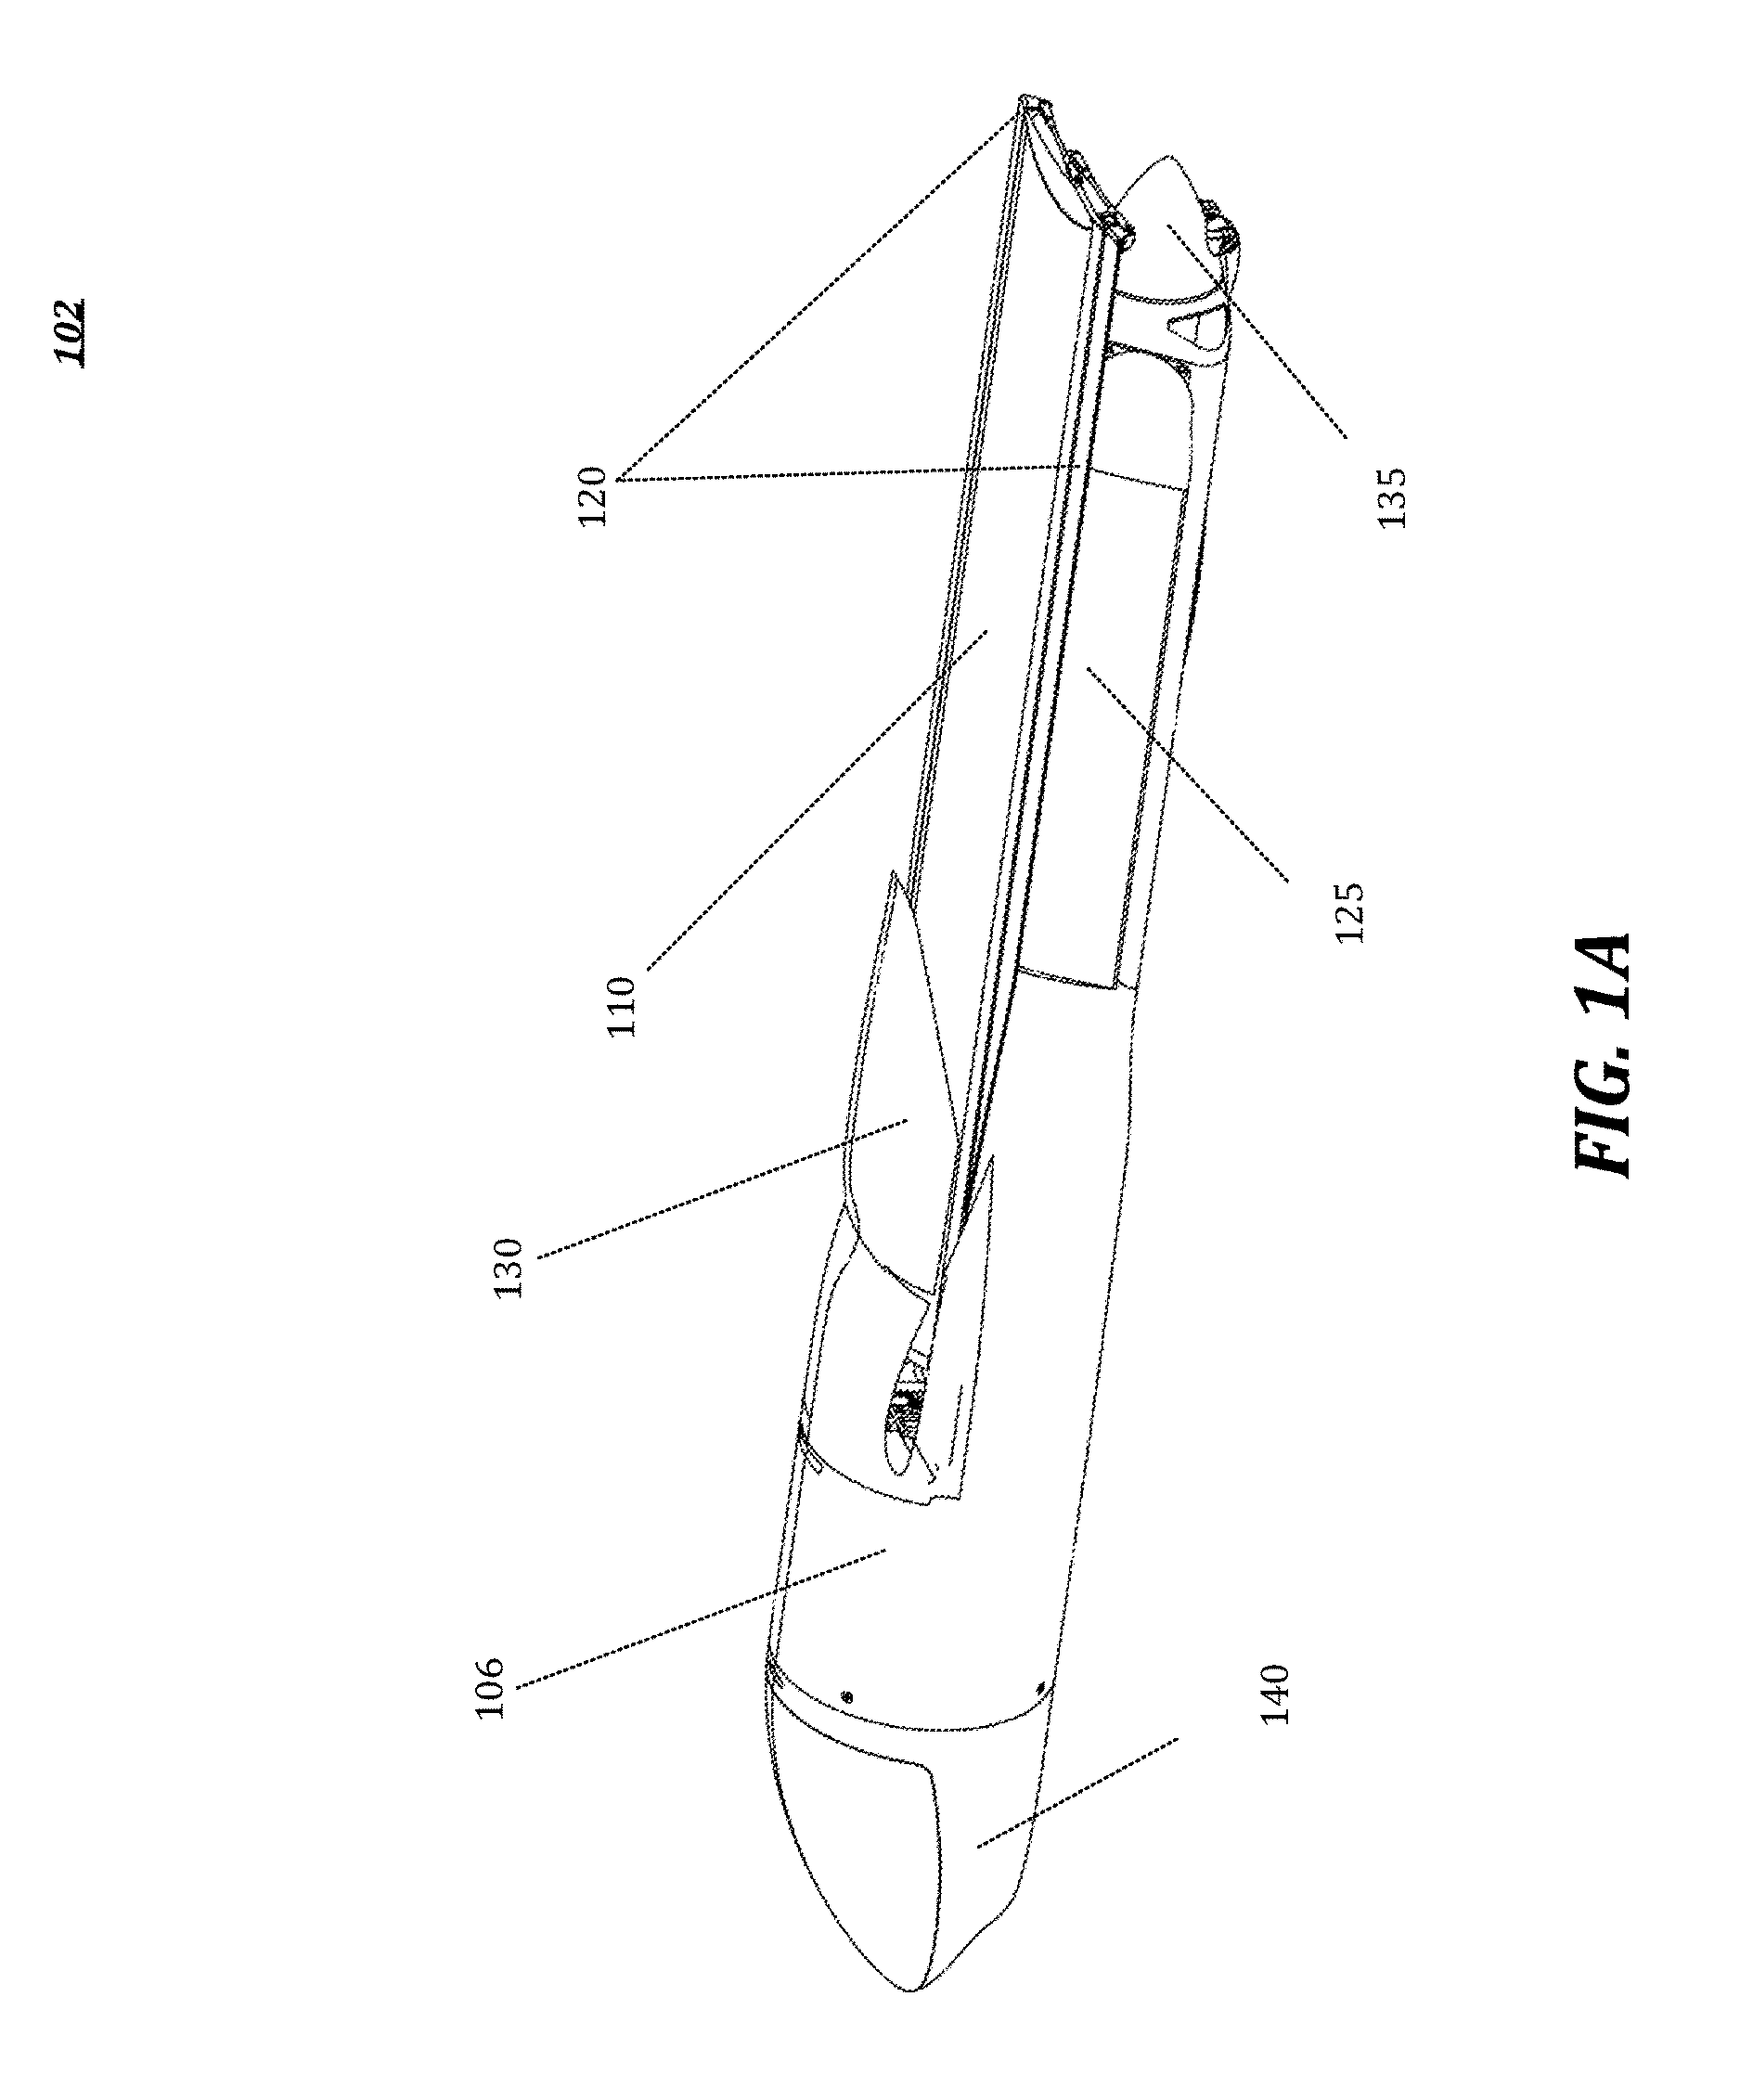 Aerial vehicle with deployable components